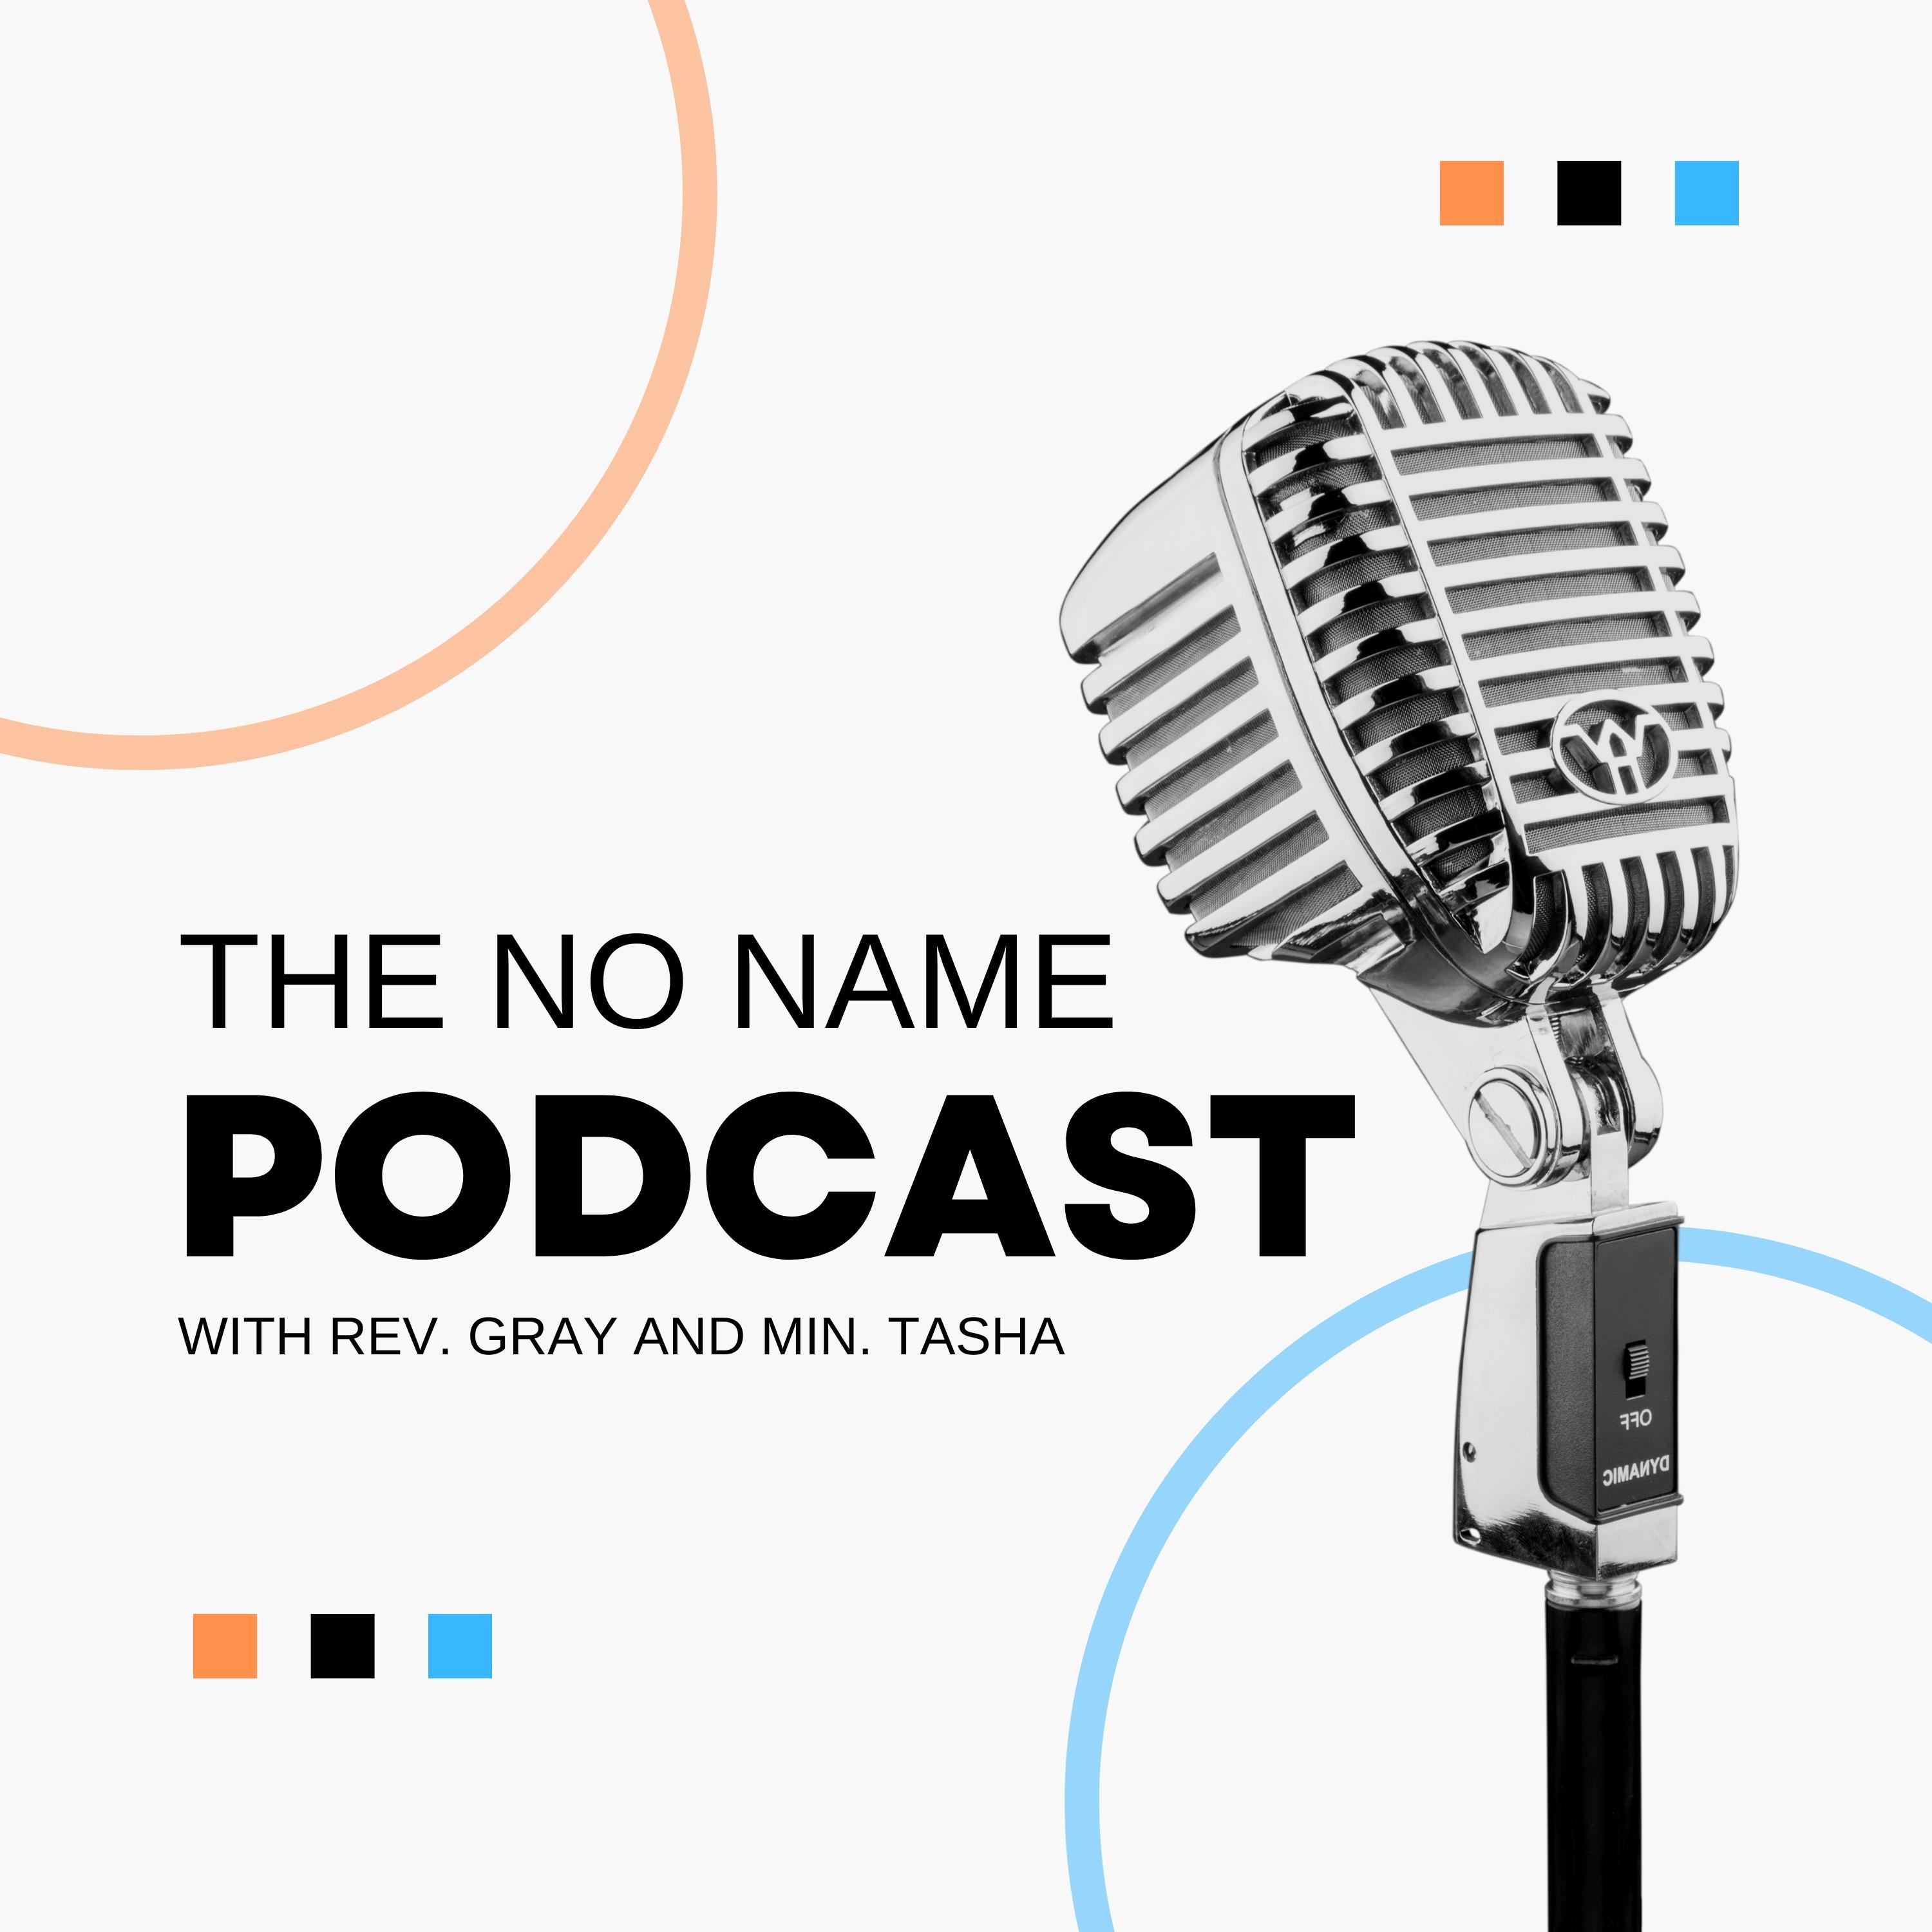 The No Name Podcast